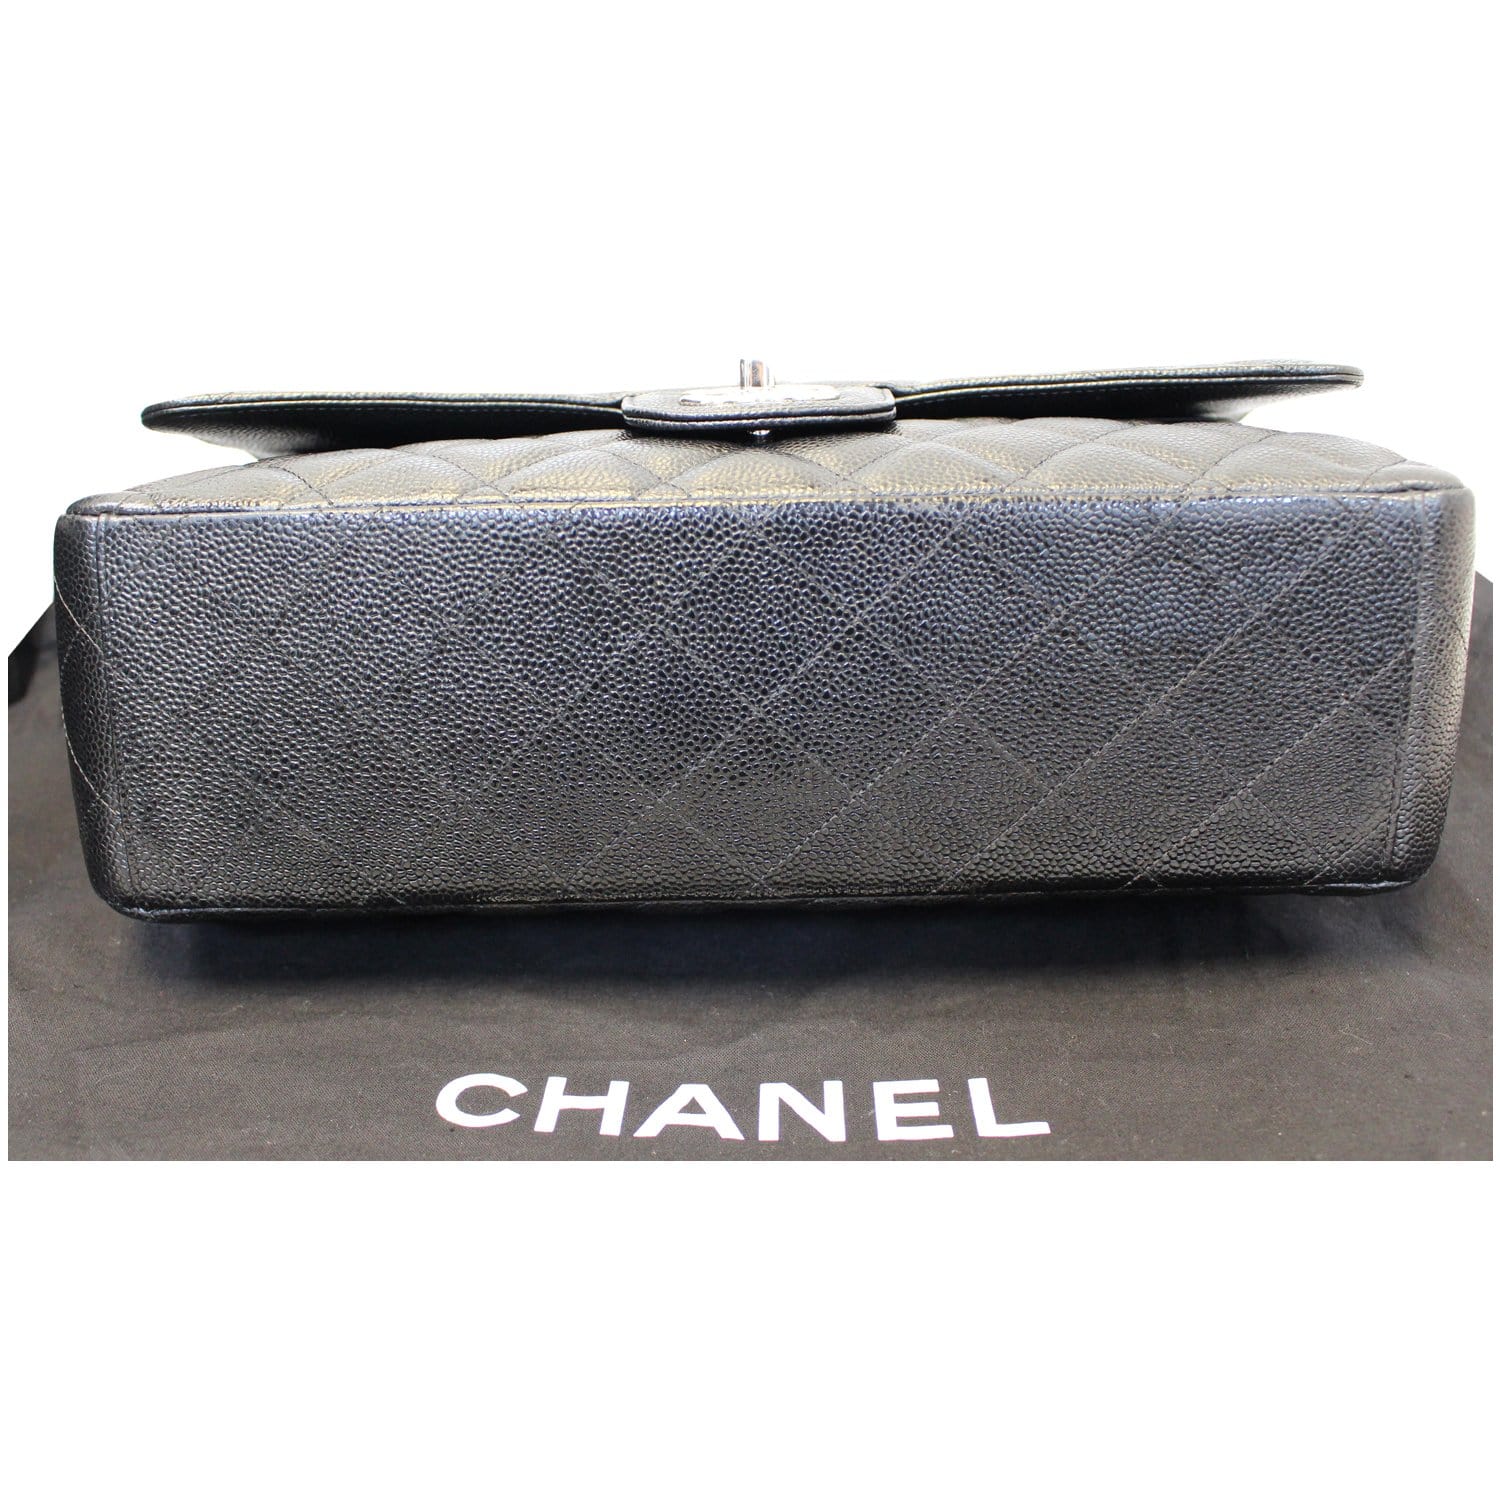 Chanel 34 Chanel 13inch Maxi Jumbo Black Quilted Leather Shoulder